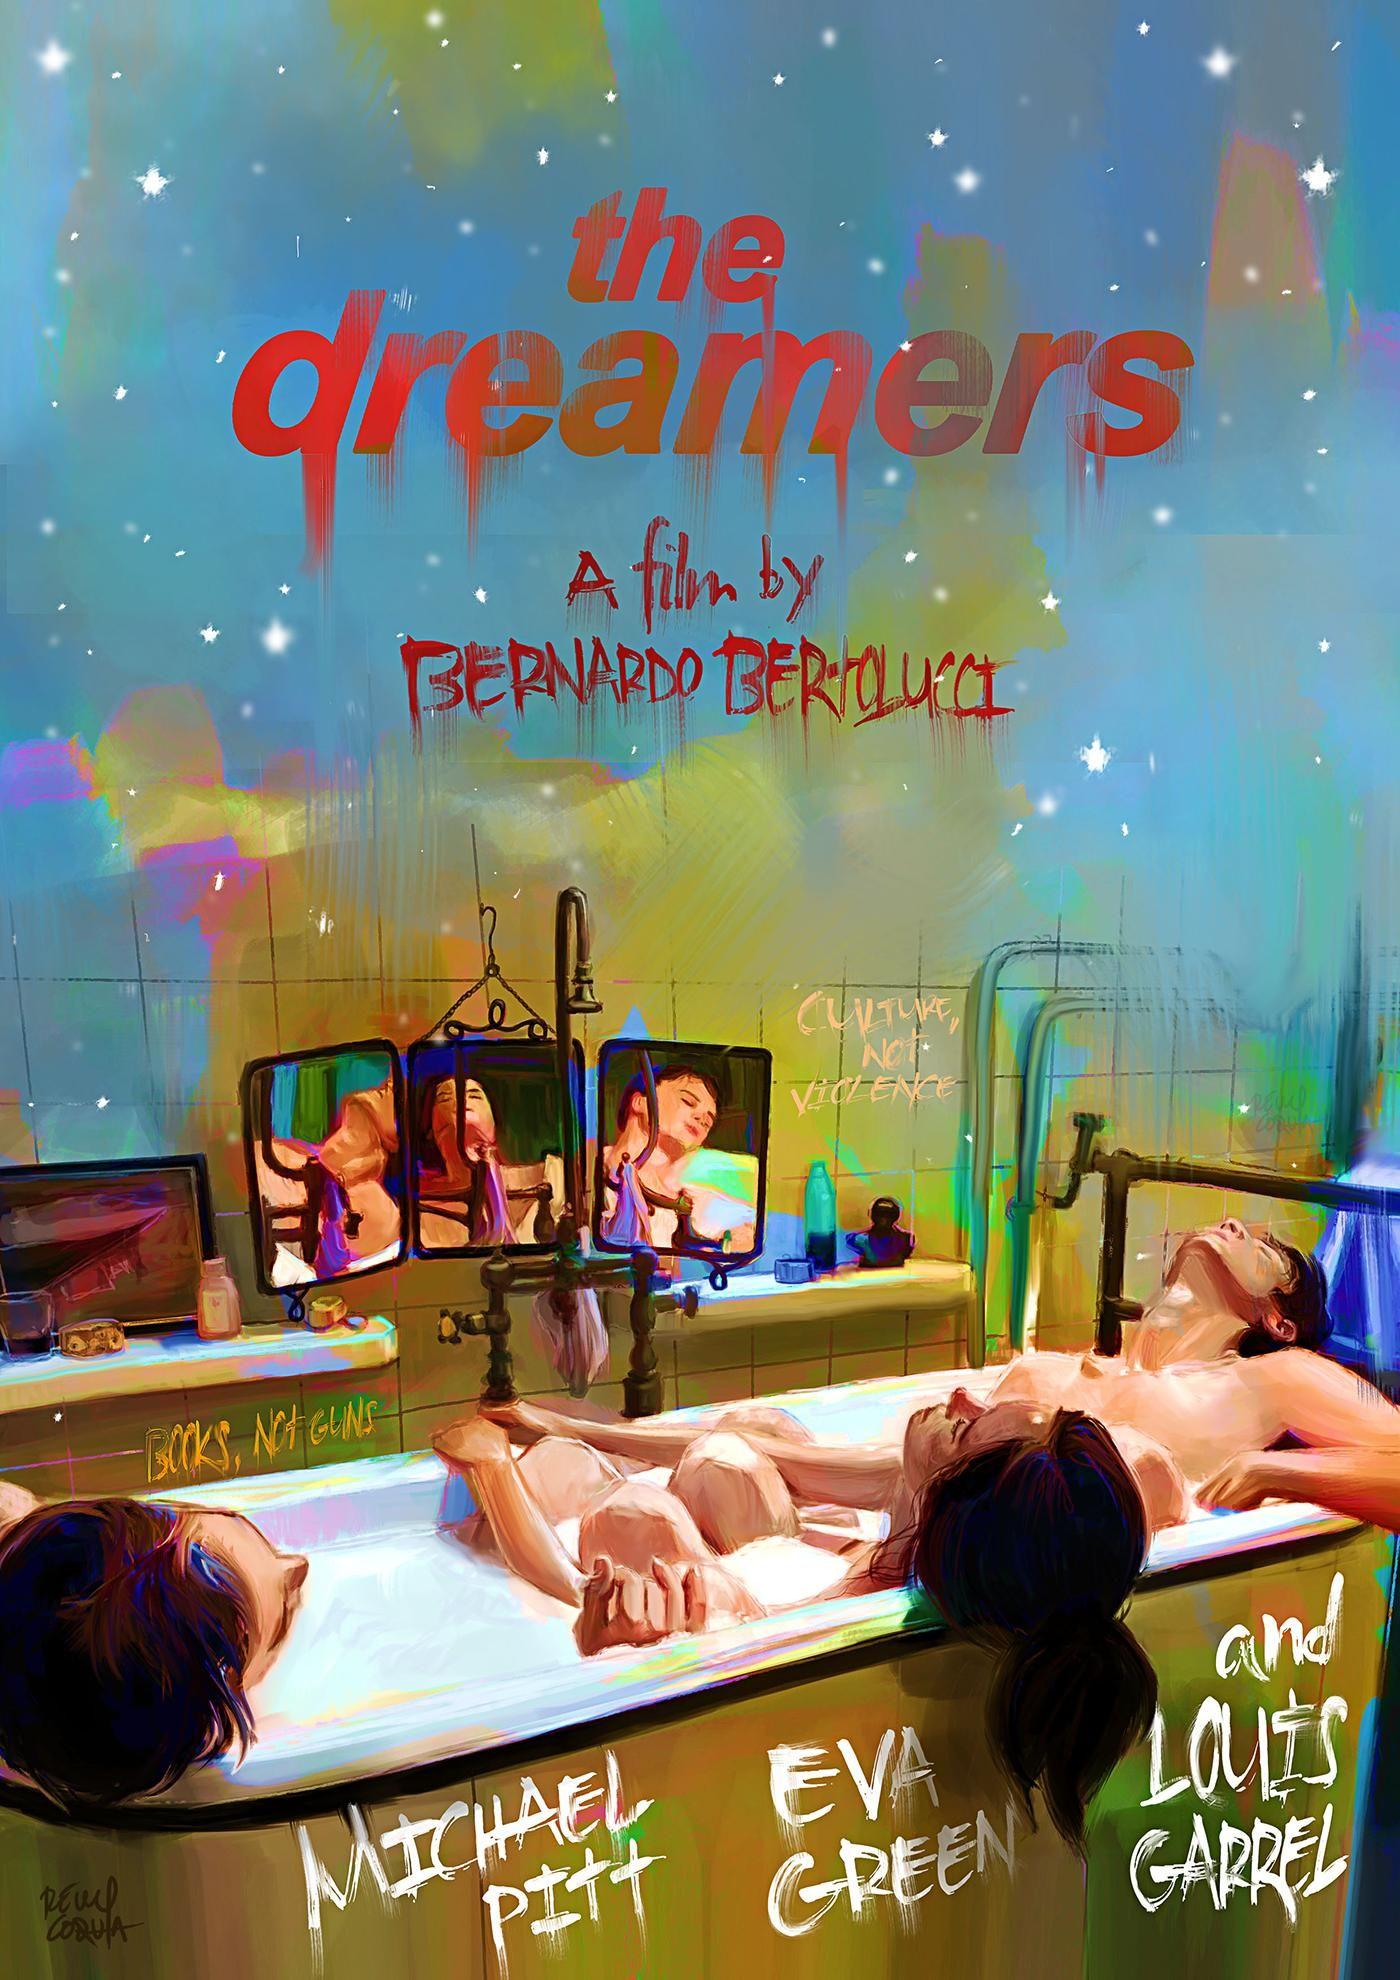 The Dreamers (2003) [1400 x 1980] HD Wallpaper From